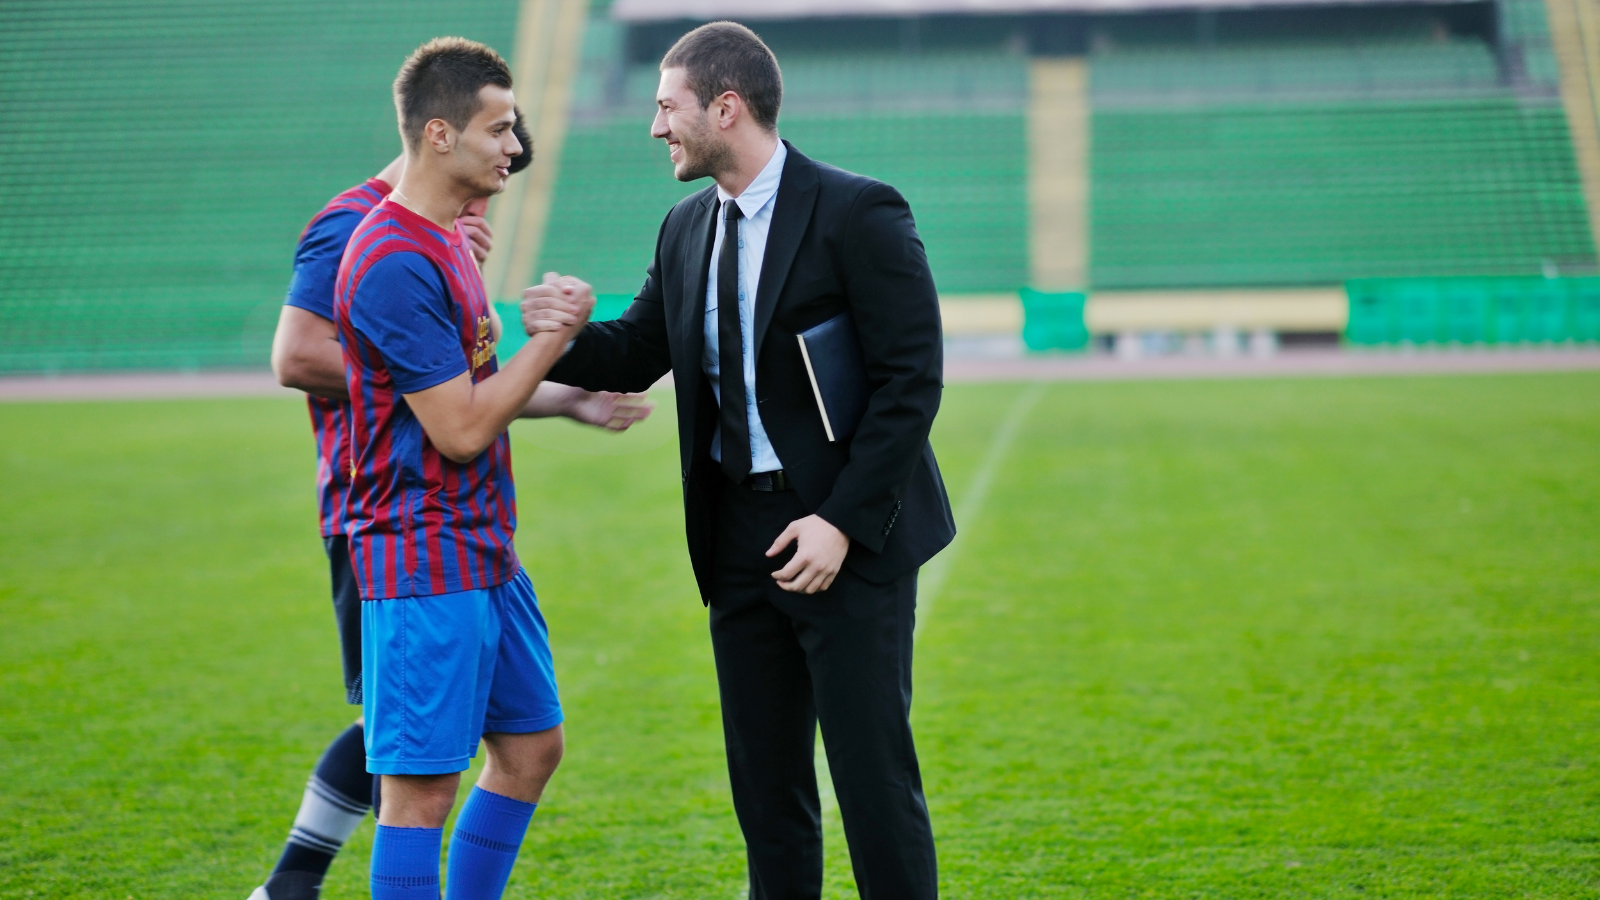 soccer player and his agent shaking hands